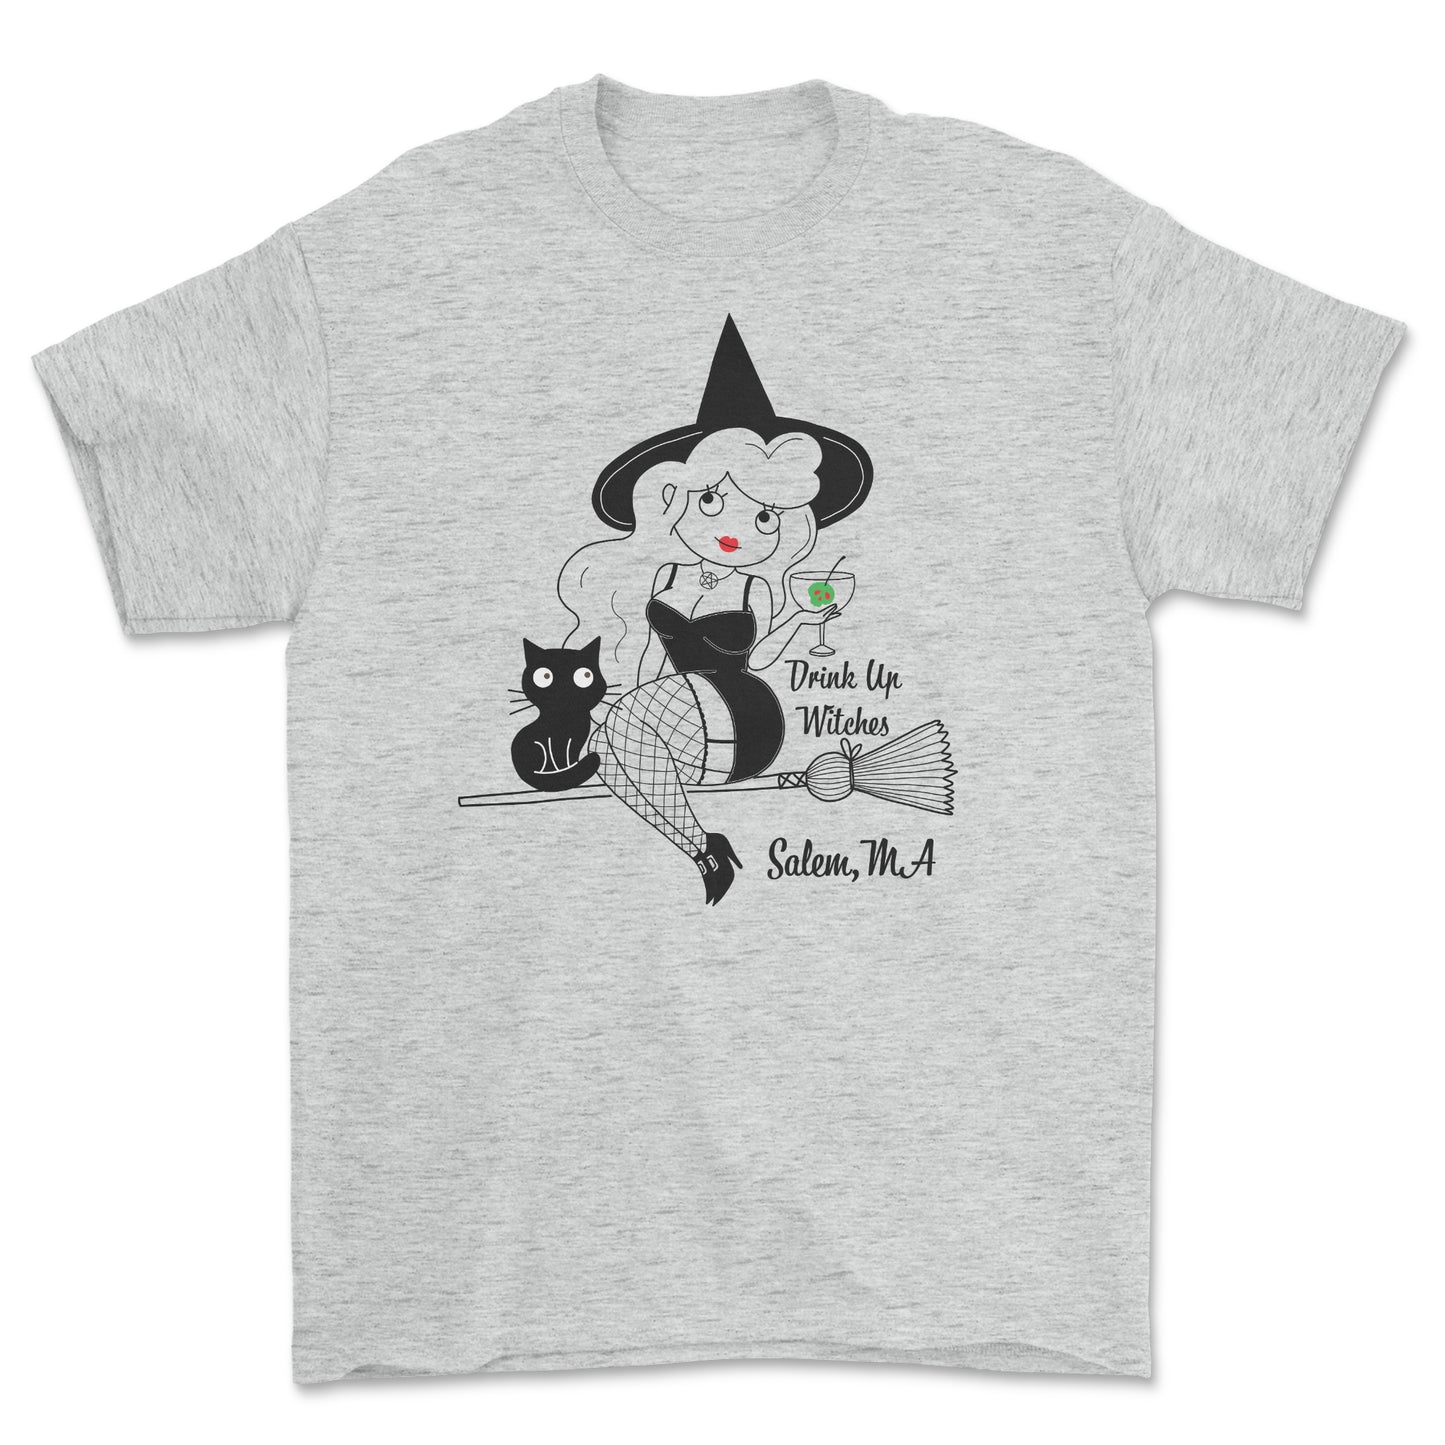 DRINK UP WITCHES T-SHIRT